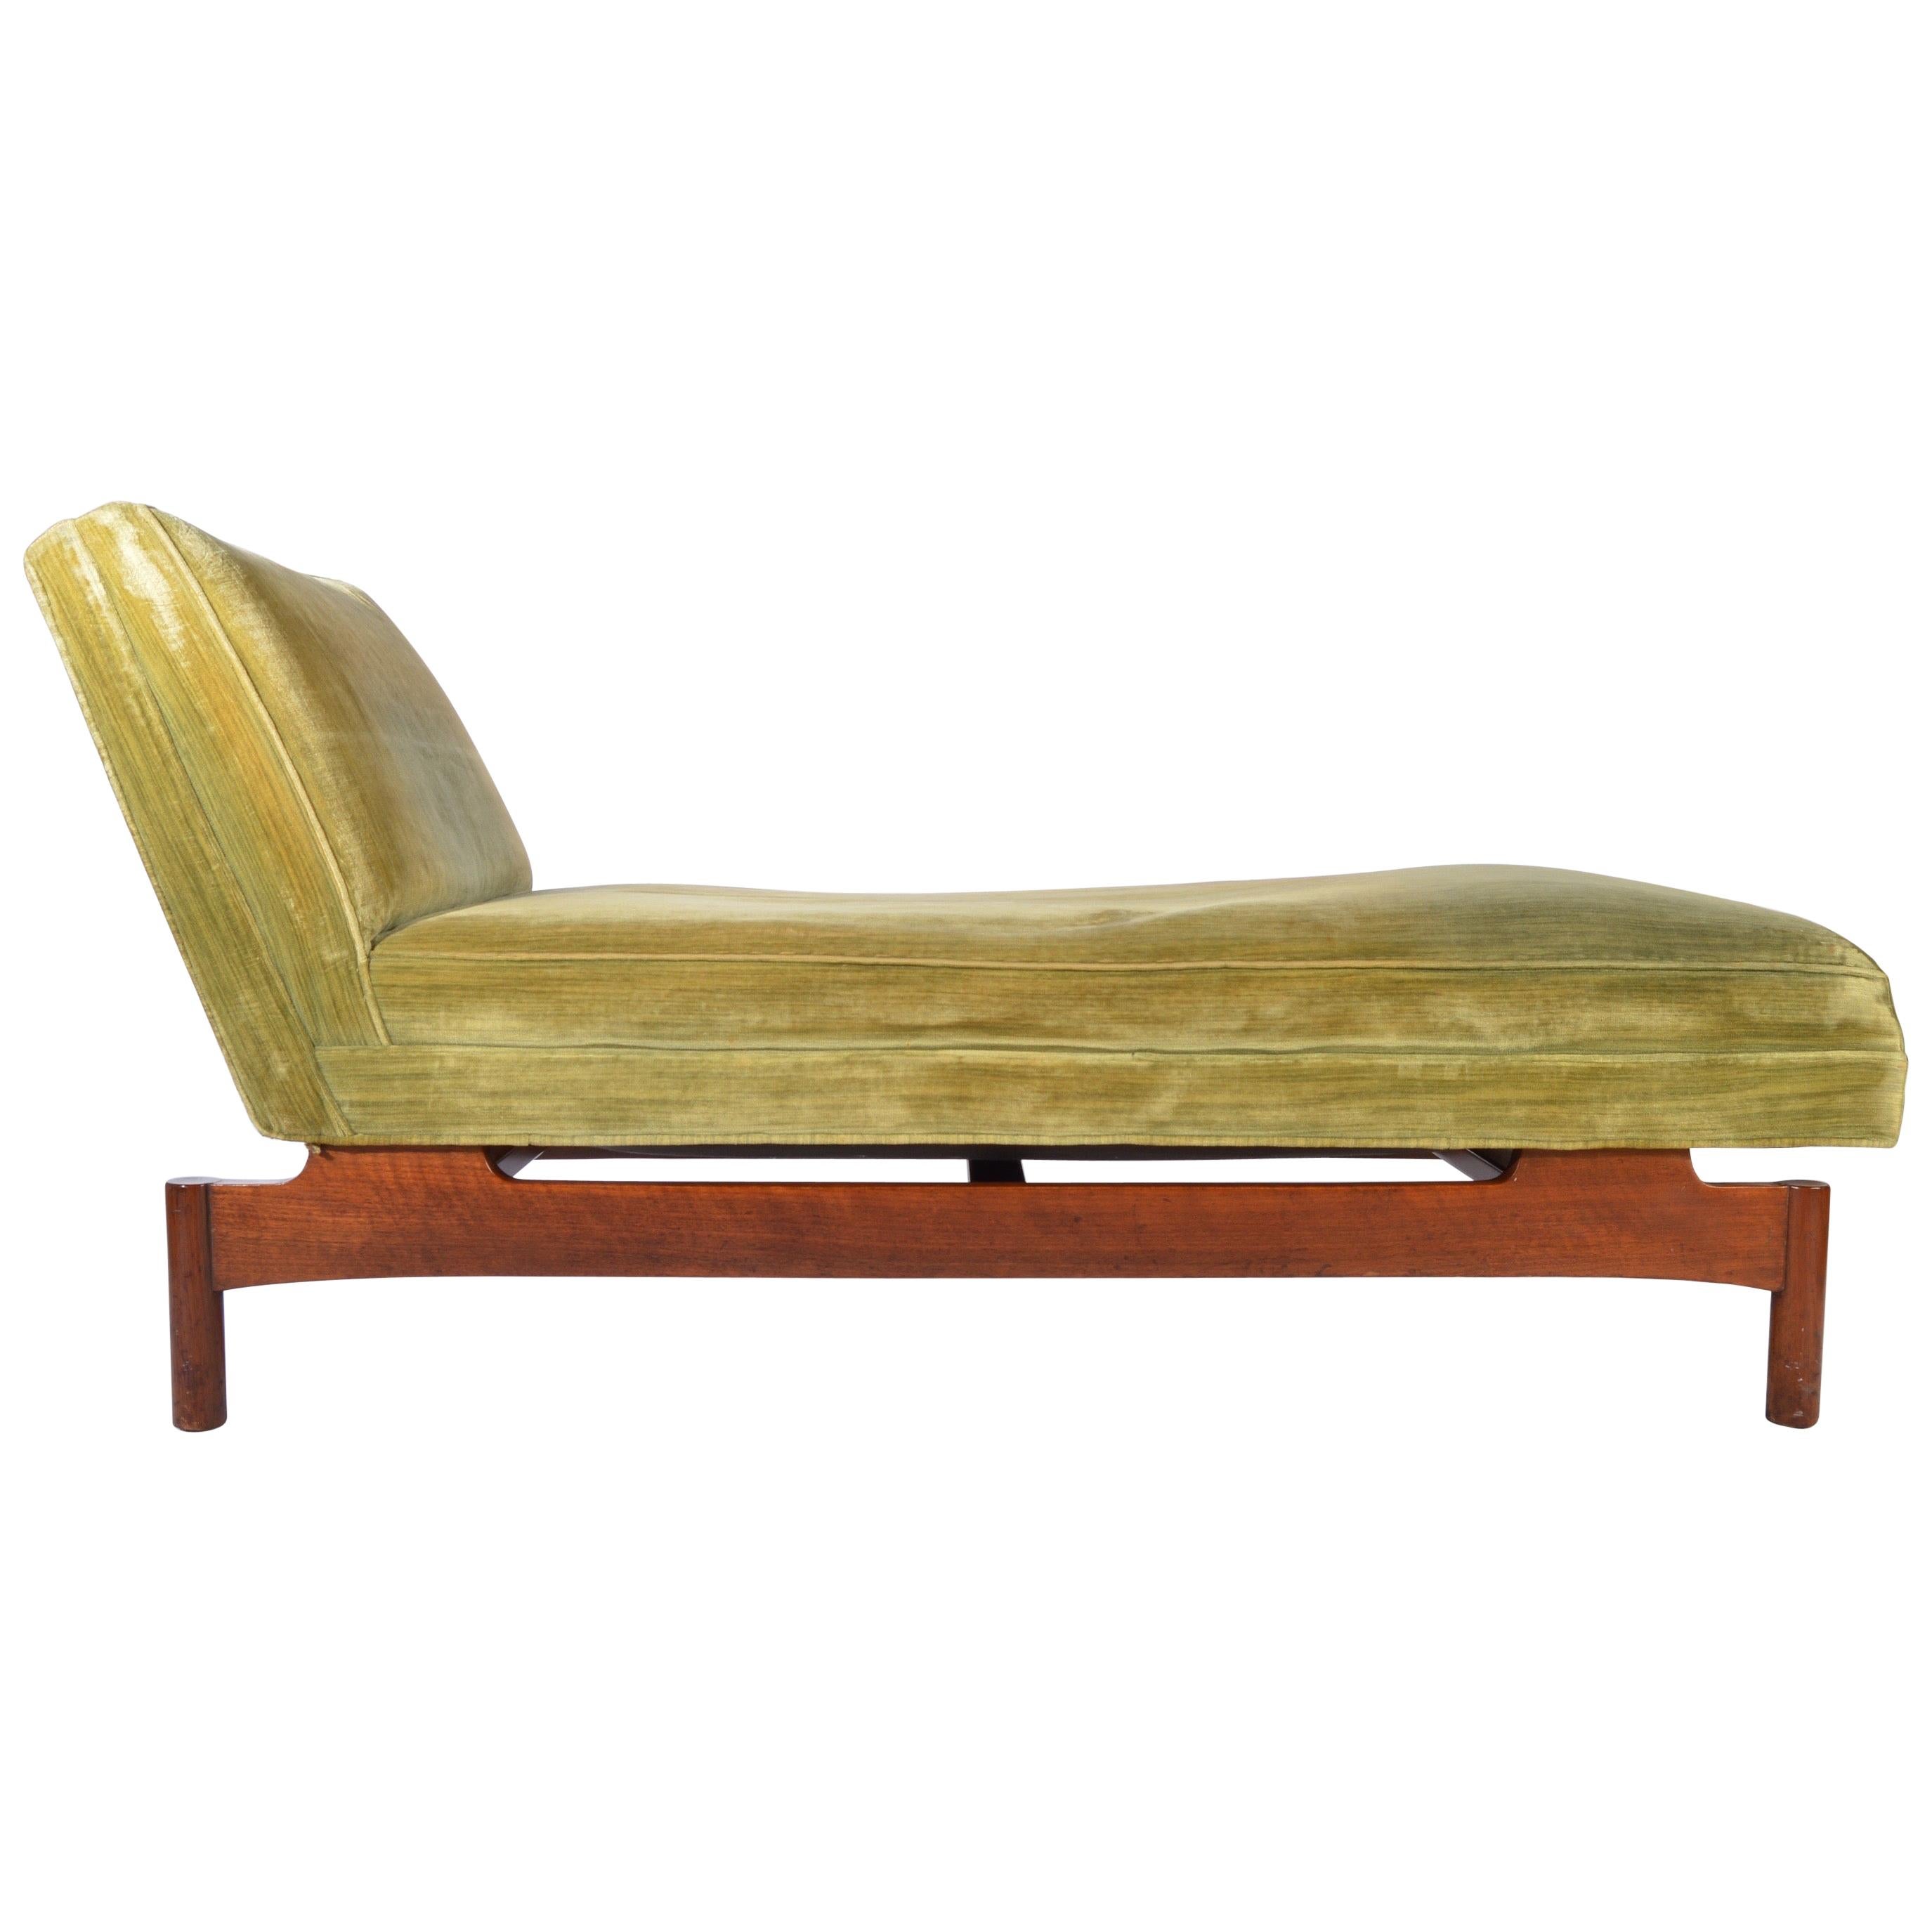 Important Gerald Luss for Lehigh Chaise Lounge Chair in Walnut, circa 1950